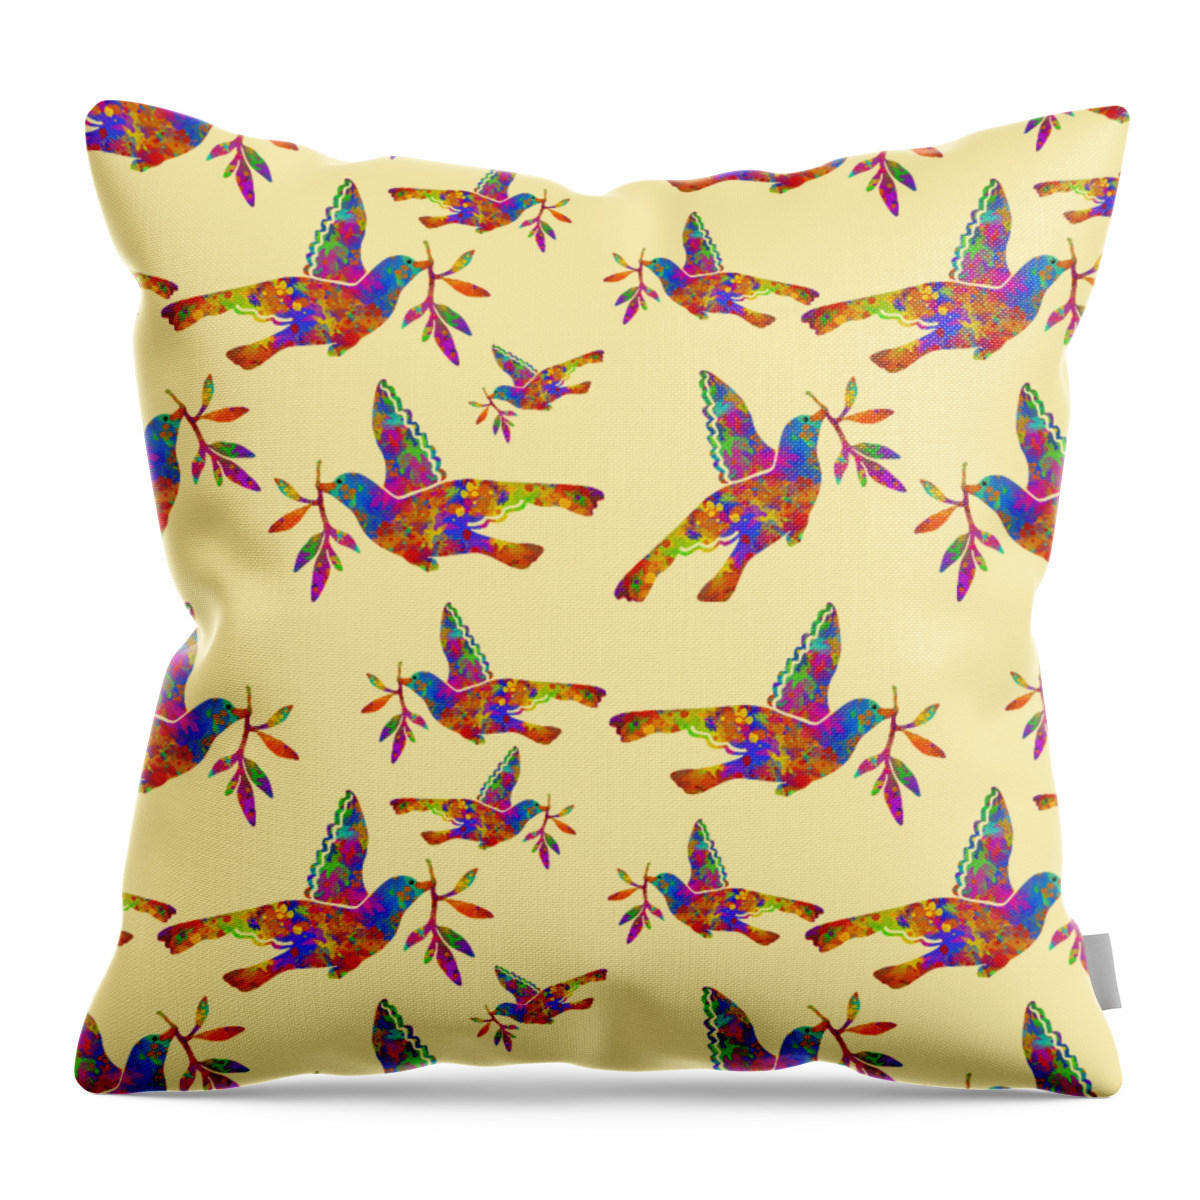 Dove Throw Pillow featuring the mixed media Dove With Olive Branch by Christina Rollo